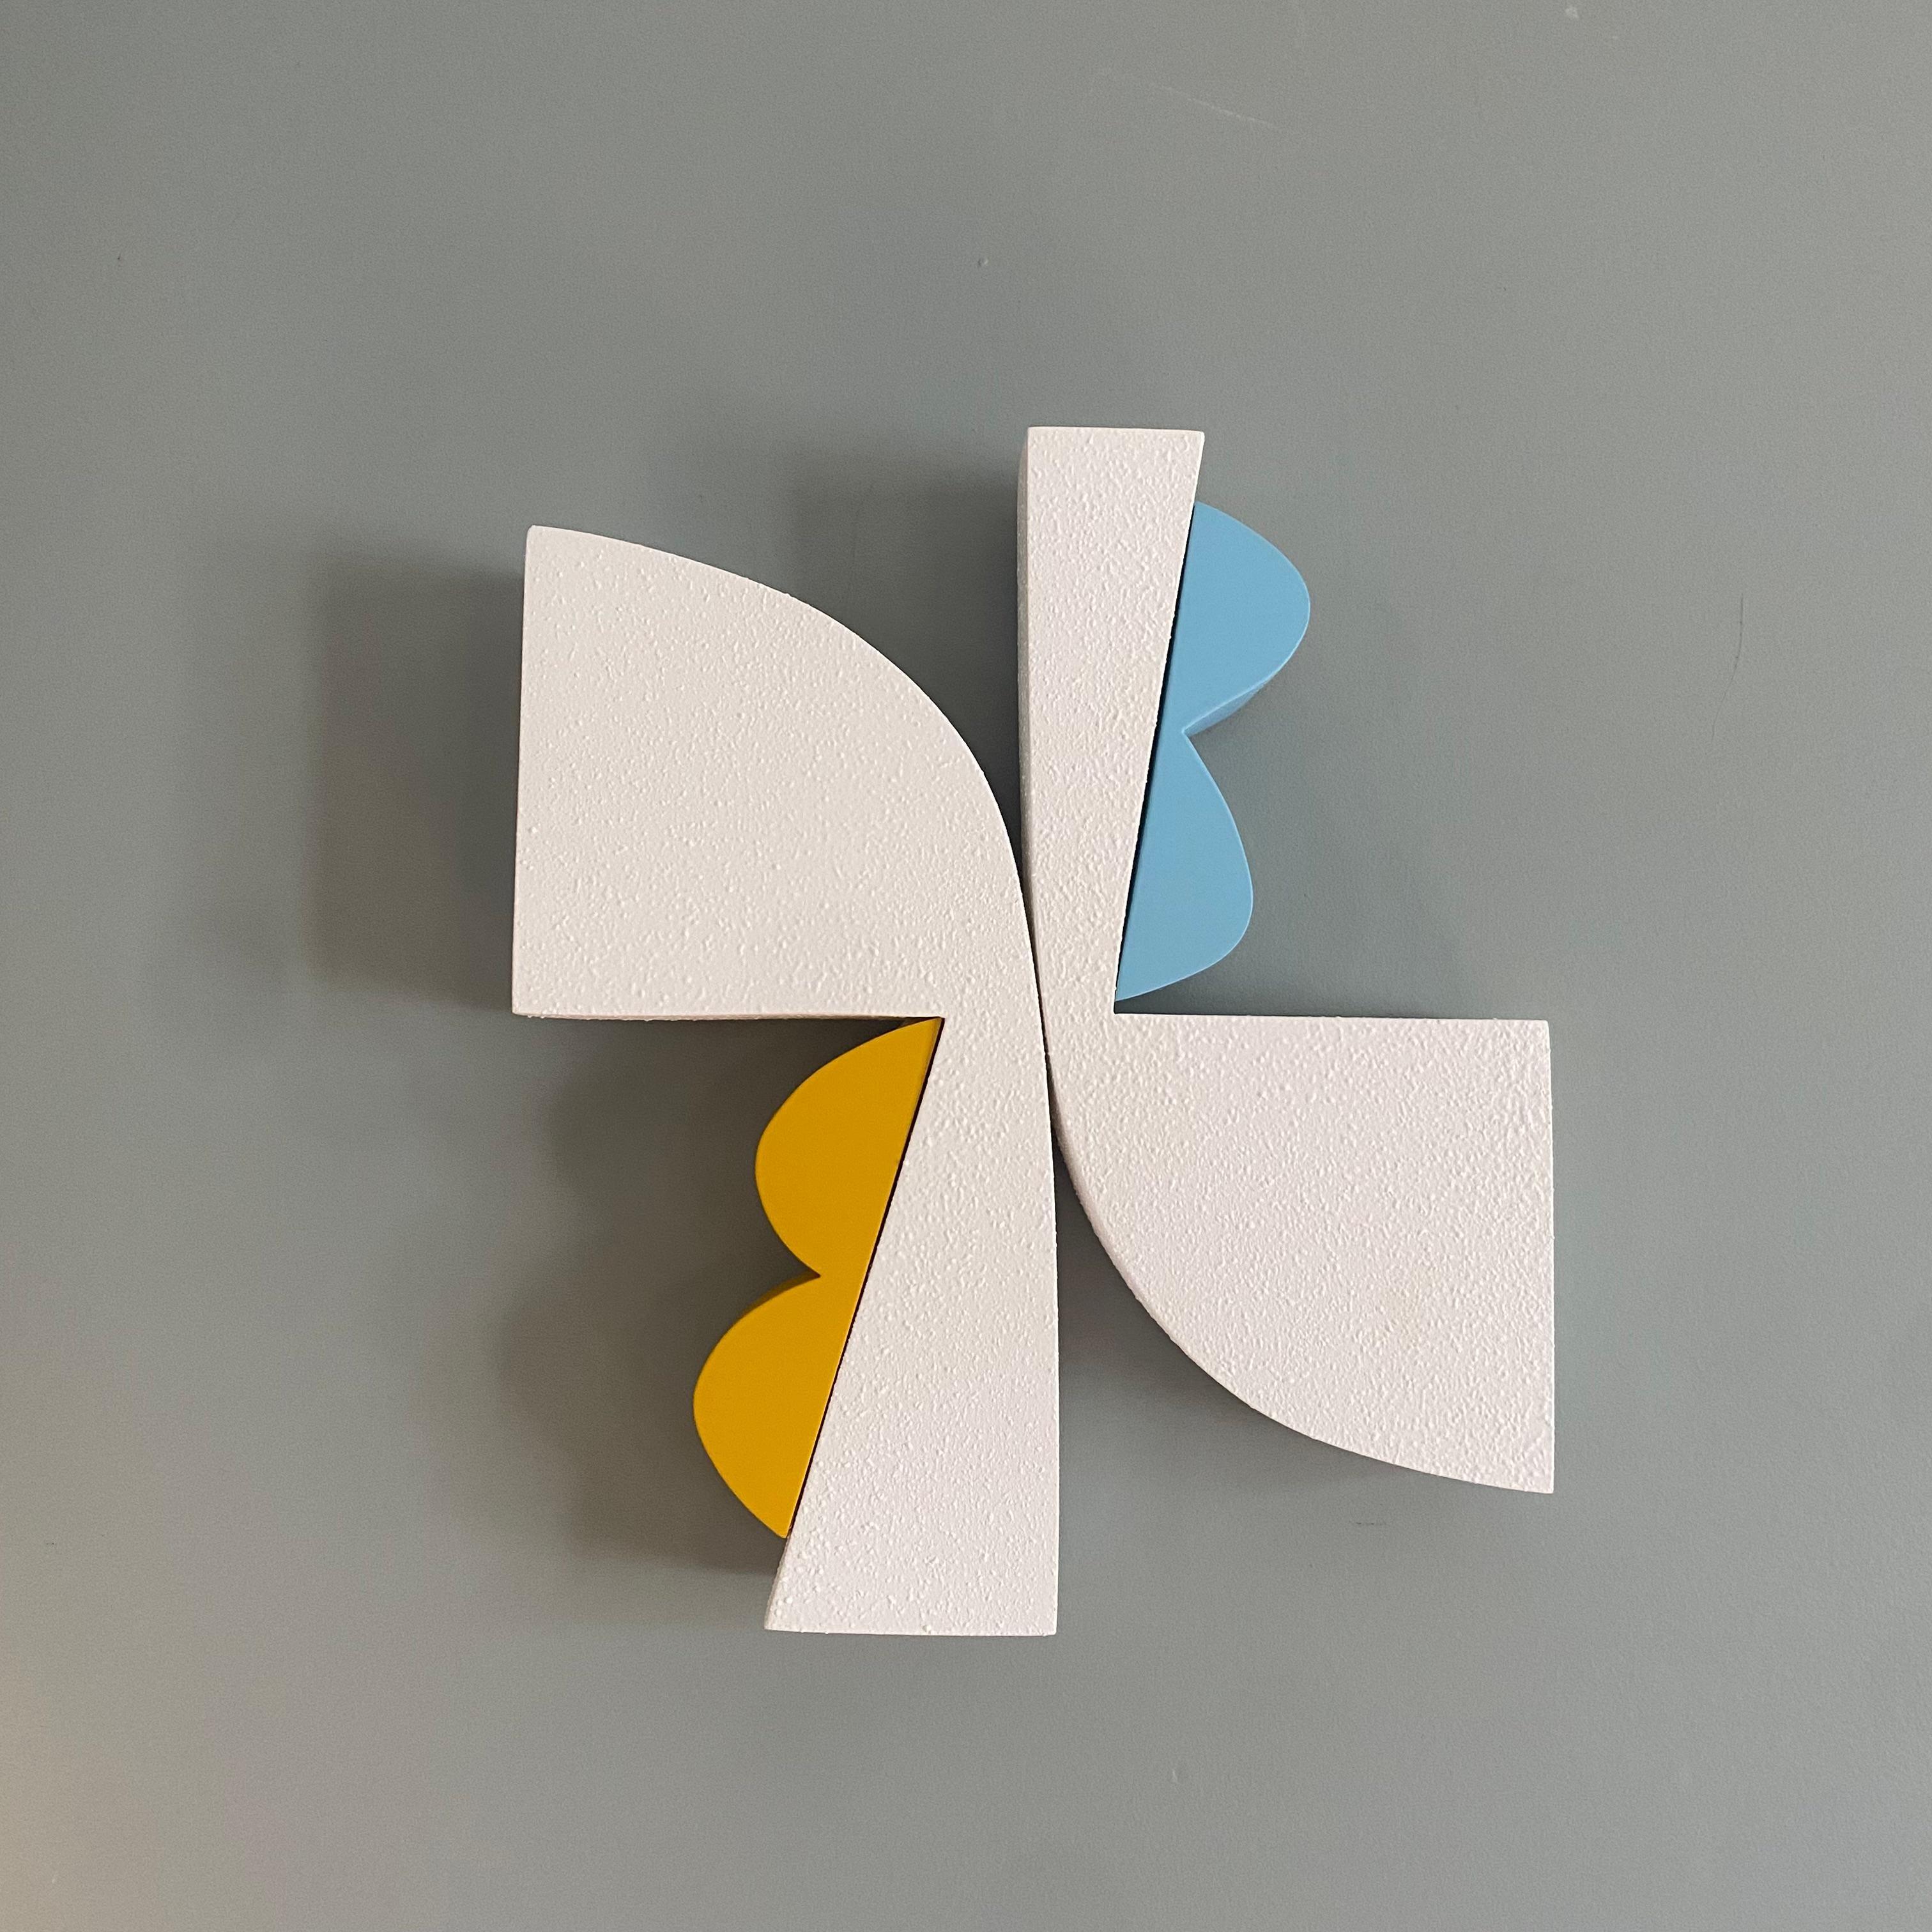 Artwork made by acrylic & texture on solid maple, with matte clear coat.

Small Pop series are minimalist driven, wood wall sculptures that are small and blocky and feature bright saturated colors. The pieces was inspired by my love for simple bold